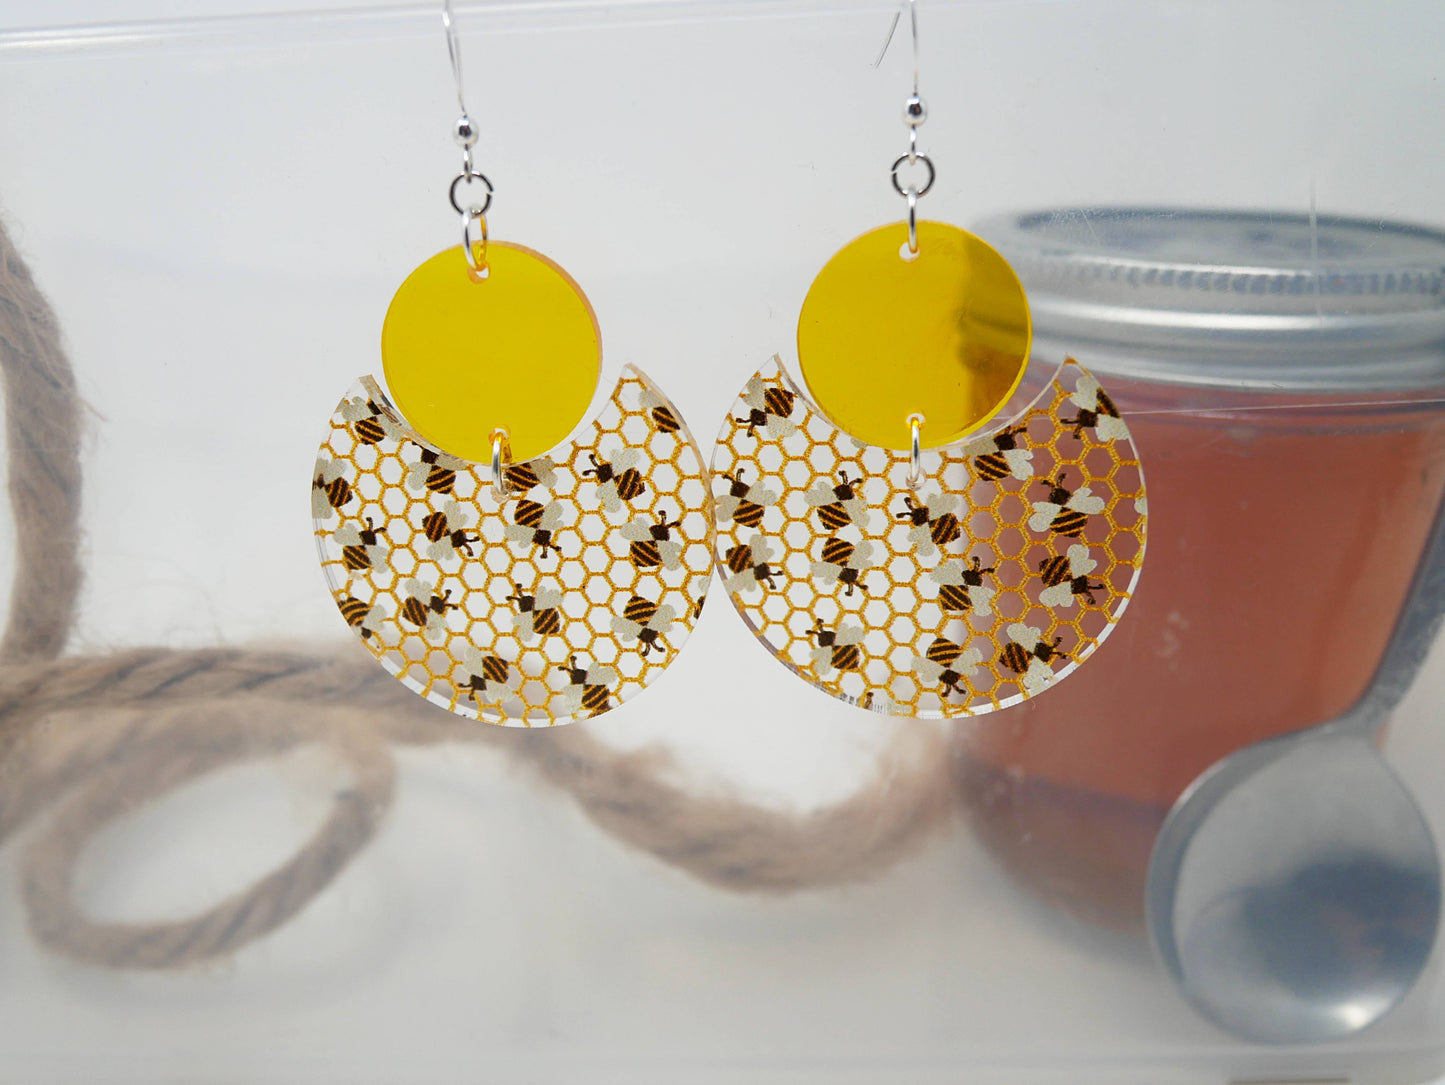 Bumblebee Honeycomb Pattern Earrings | Sterling Silver, Stainless Steel, or Clip On